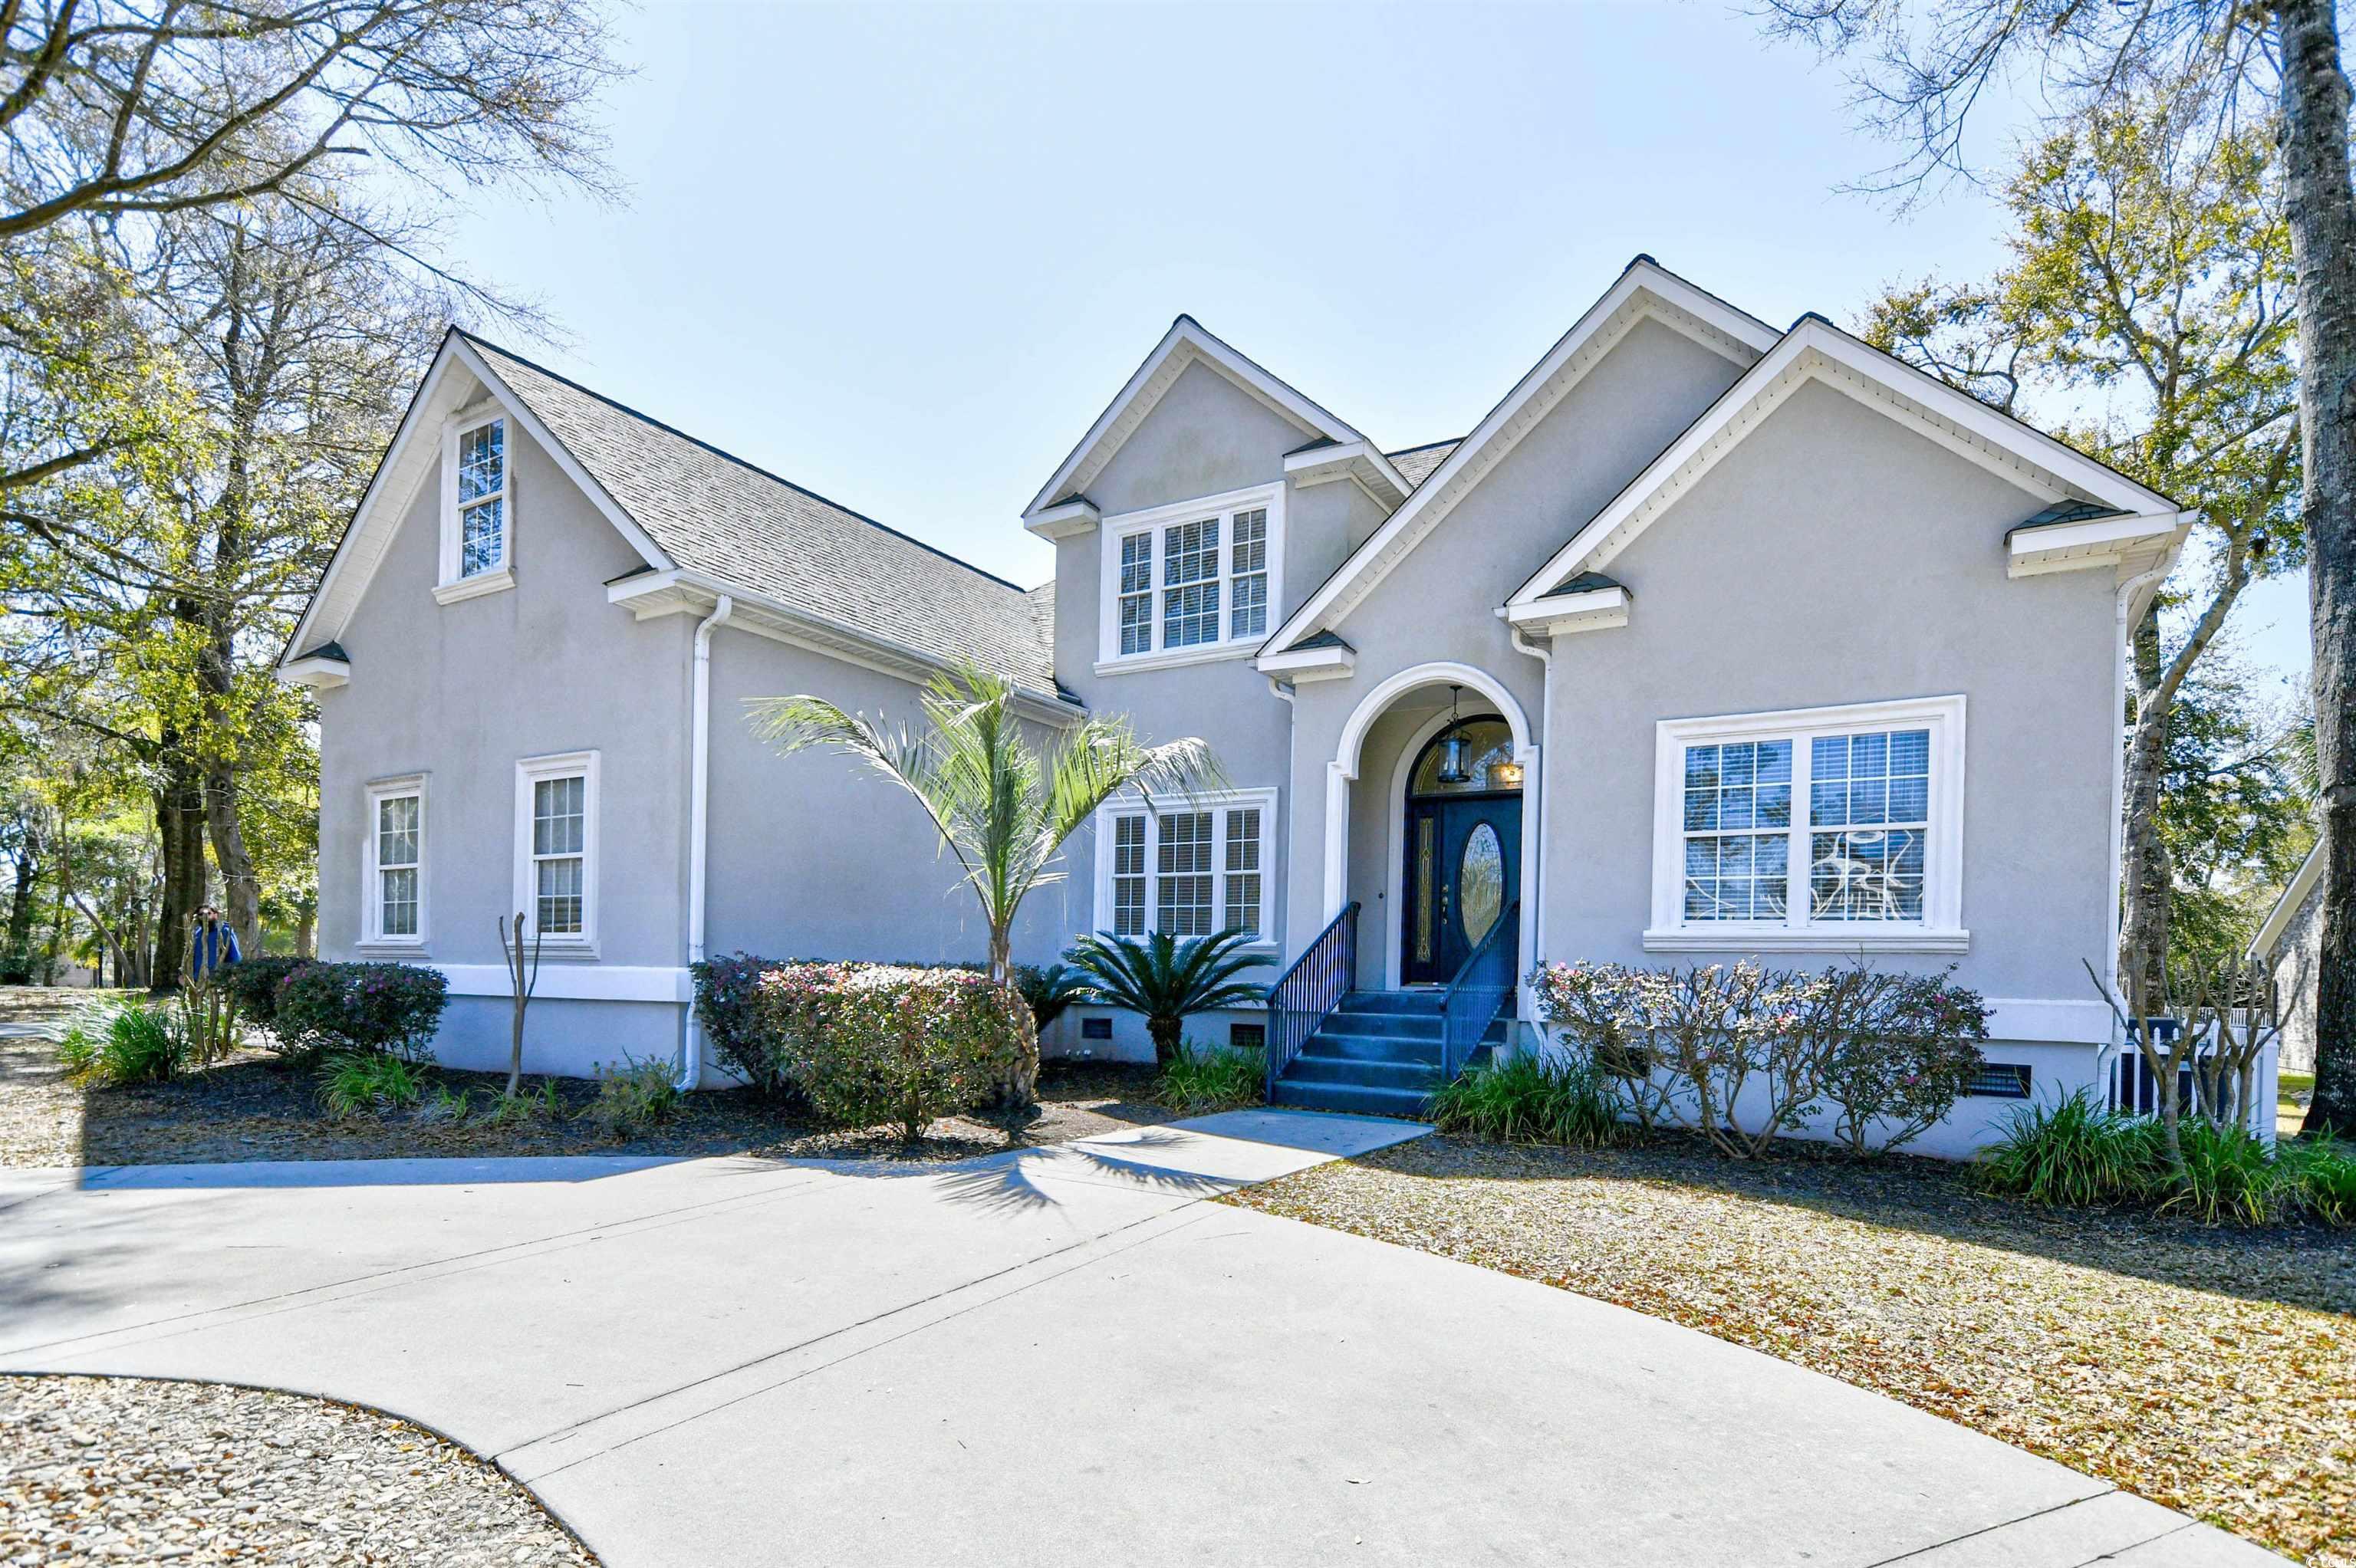 big landing plantation is a private, gated community with fantastic amenities! a true, hidden gem with 100+ year old live oaks, a pier with day docks along the intracoastal waterway, pool area and large clubhouse with a large banquet room and kitchen. if you are looking for something that is very quiet this, is it. the home features 3224 heated square feet and 4146 square feet under roof. there are 4 bedrooms with 3 and half baths, office, formal dining, large living room with fireplace, beautiful hardwood flooring, large kitchen with new granite counter tops, new stainless-steel appliances, and large master suite all on the first floor. off the living room is a large, covered porch overlooking the large back yard large enough for a pool. you will love the large 3 car garage with ample room for all your items. the upstairs offers three bedrooms with 2 baths, a large media room, and large exercise room. a must see and fantastic opportunity! big landing borders vereen gardens which is only two minutes from downtown calabash, 10 minutes from sunset beach and north myrtle beach and is within a mile of medical facilities. an absolutely fantastic setting and location!